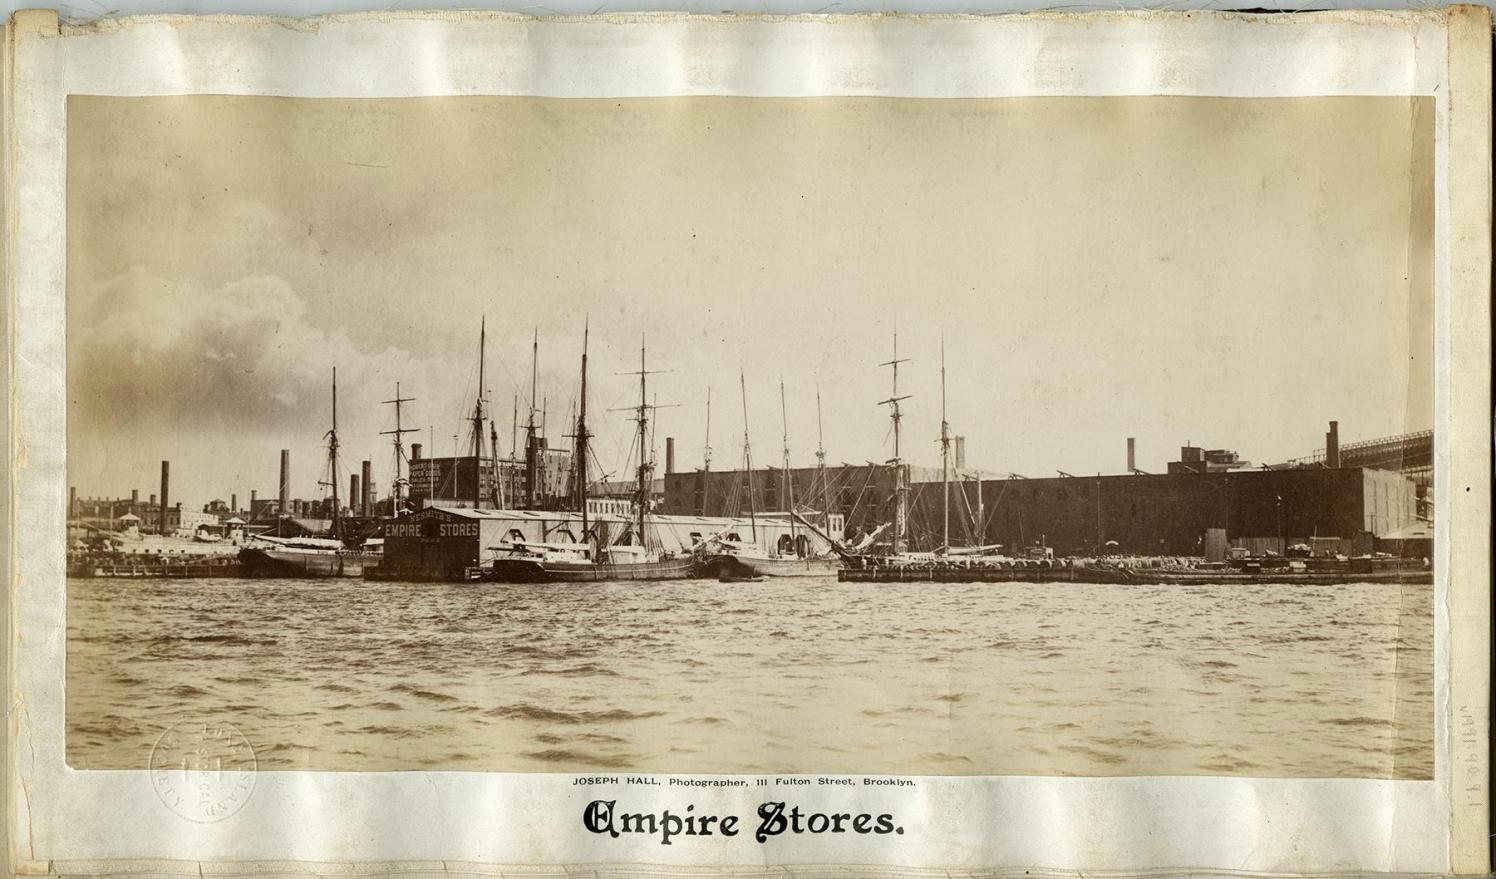 Historical photo of the Empire Stores seen from the water.